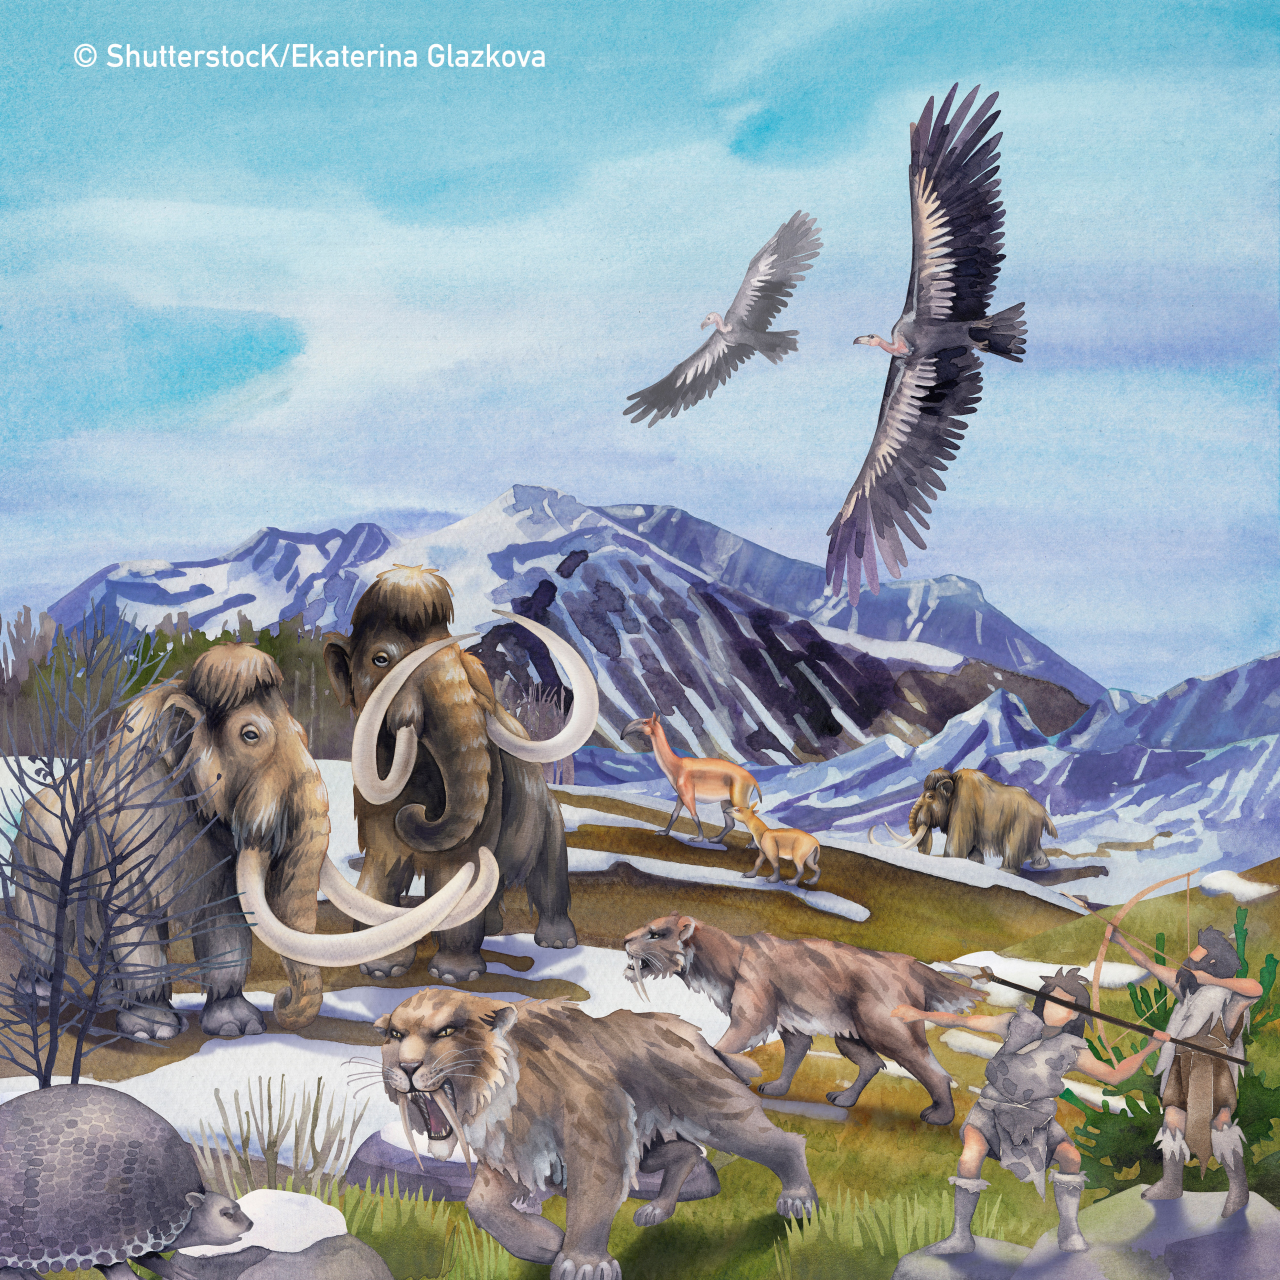 Watercolor scene of cavemen hunting on prehistoric giant animals with a mountain landscape on a background. Hand painted illustration of the Ice Age